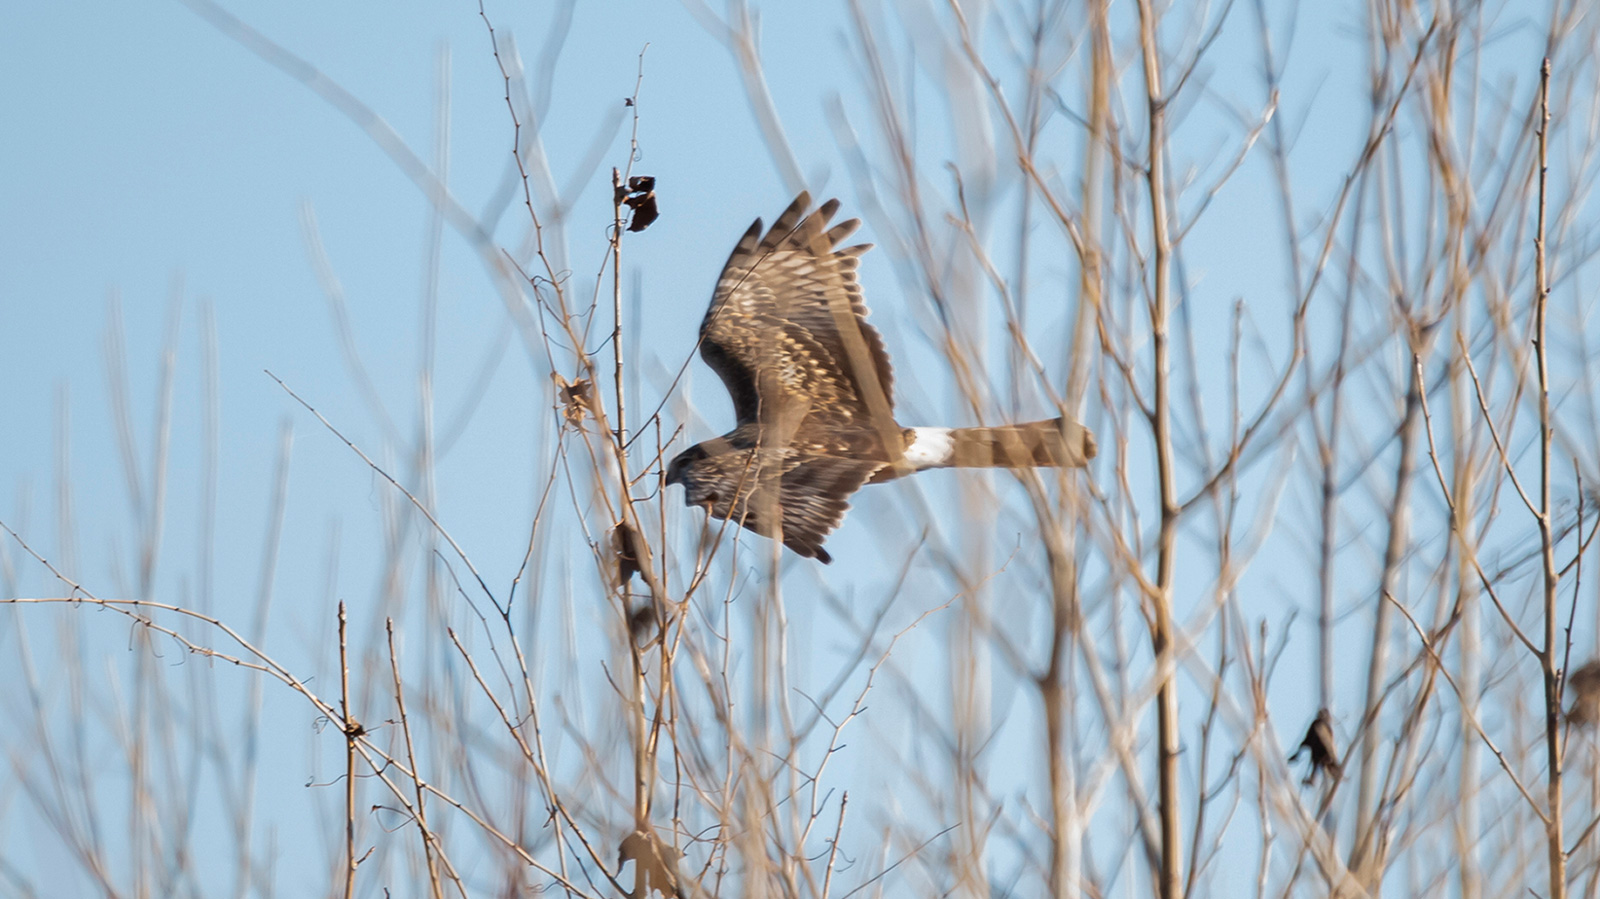 Northern harrier flying through bare trees